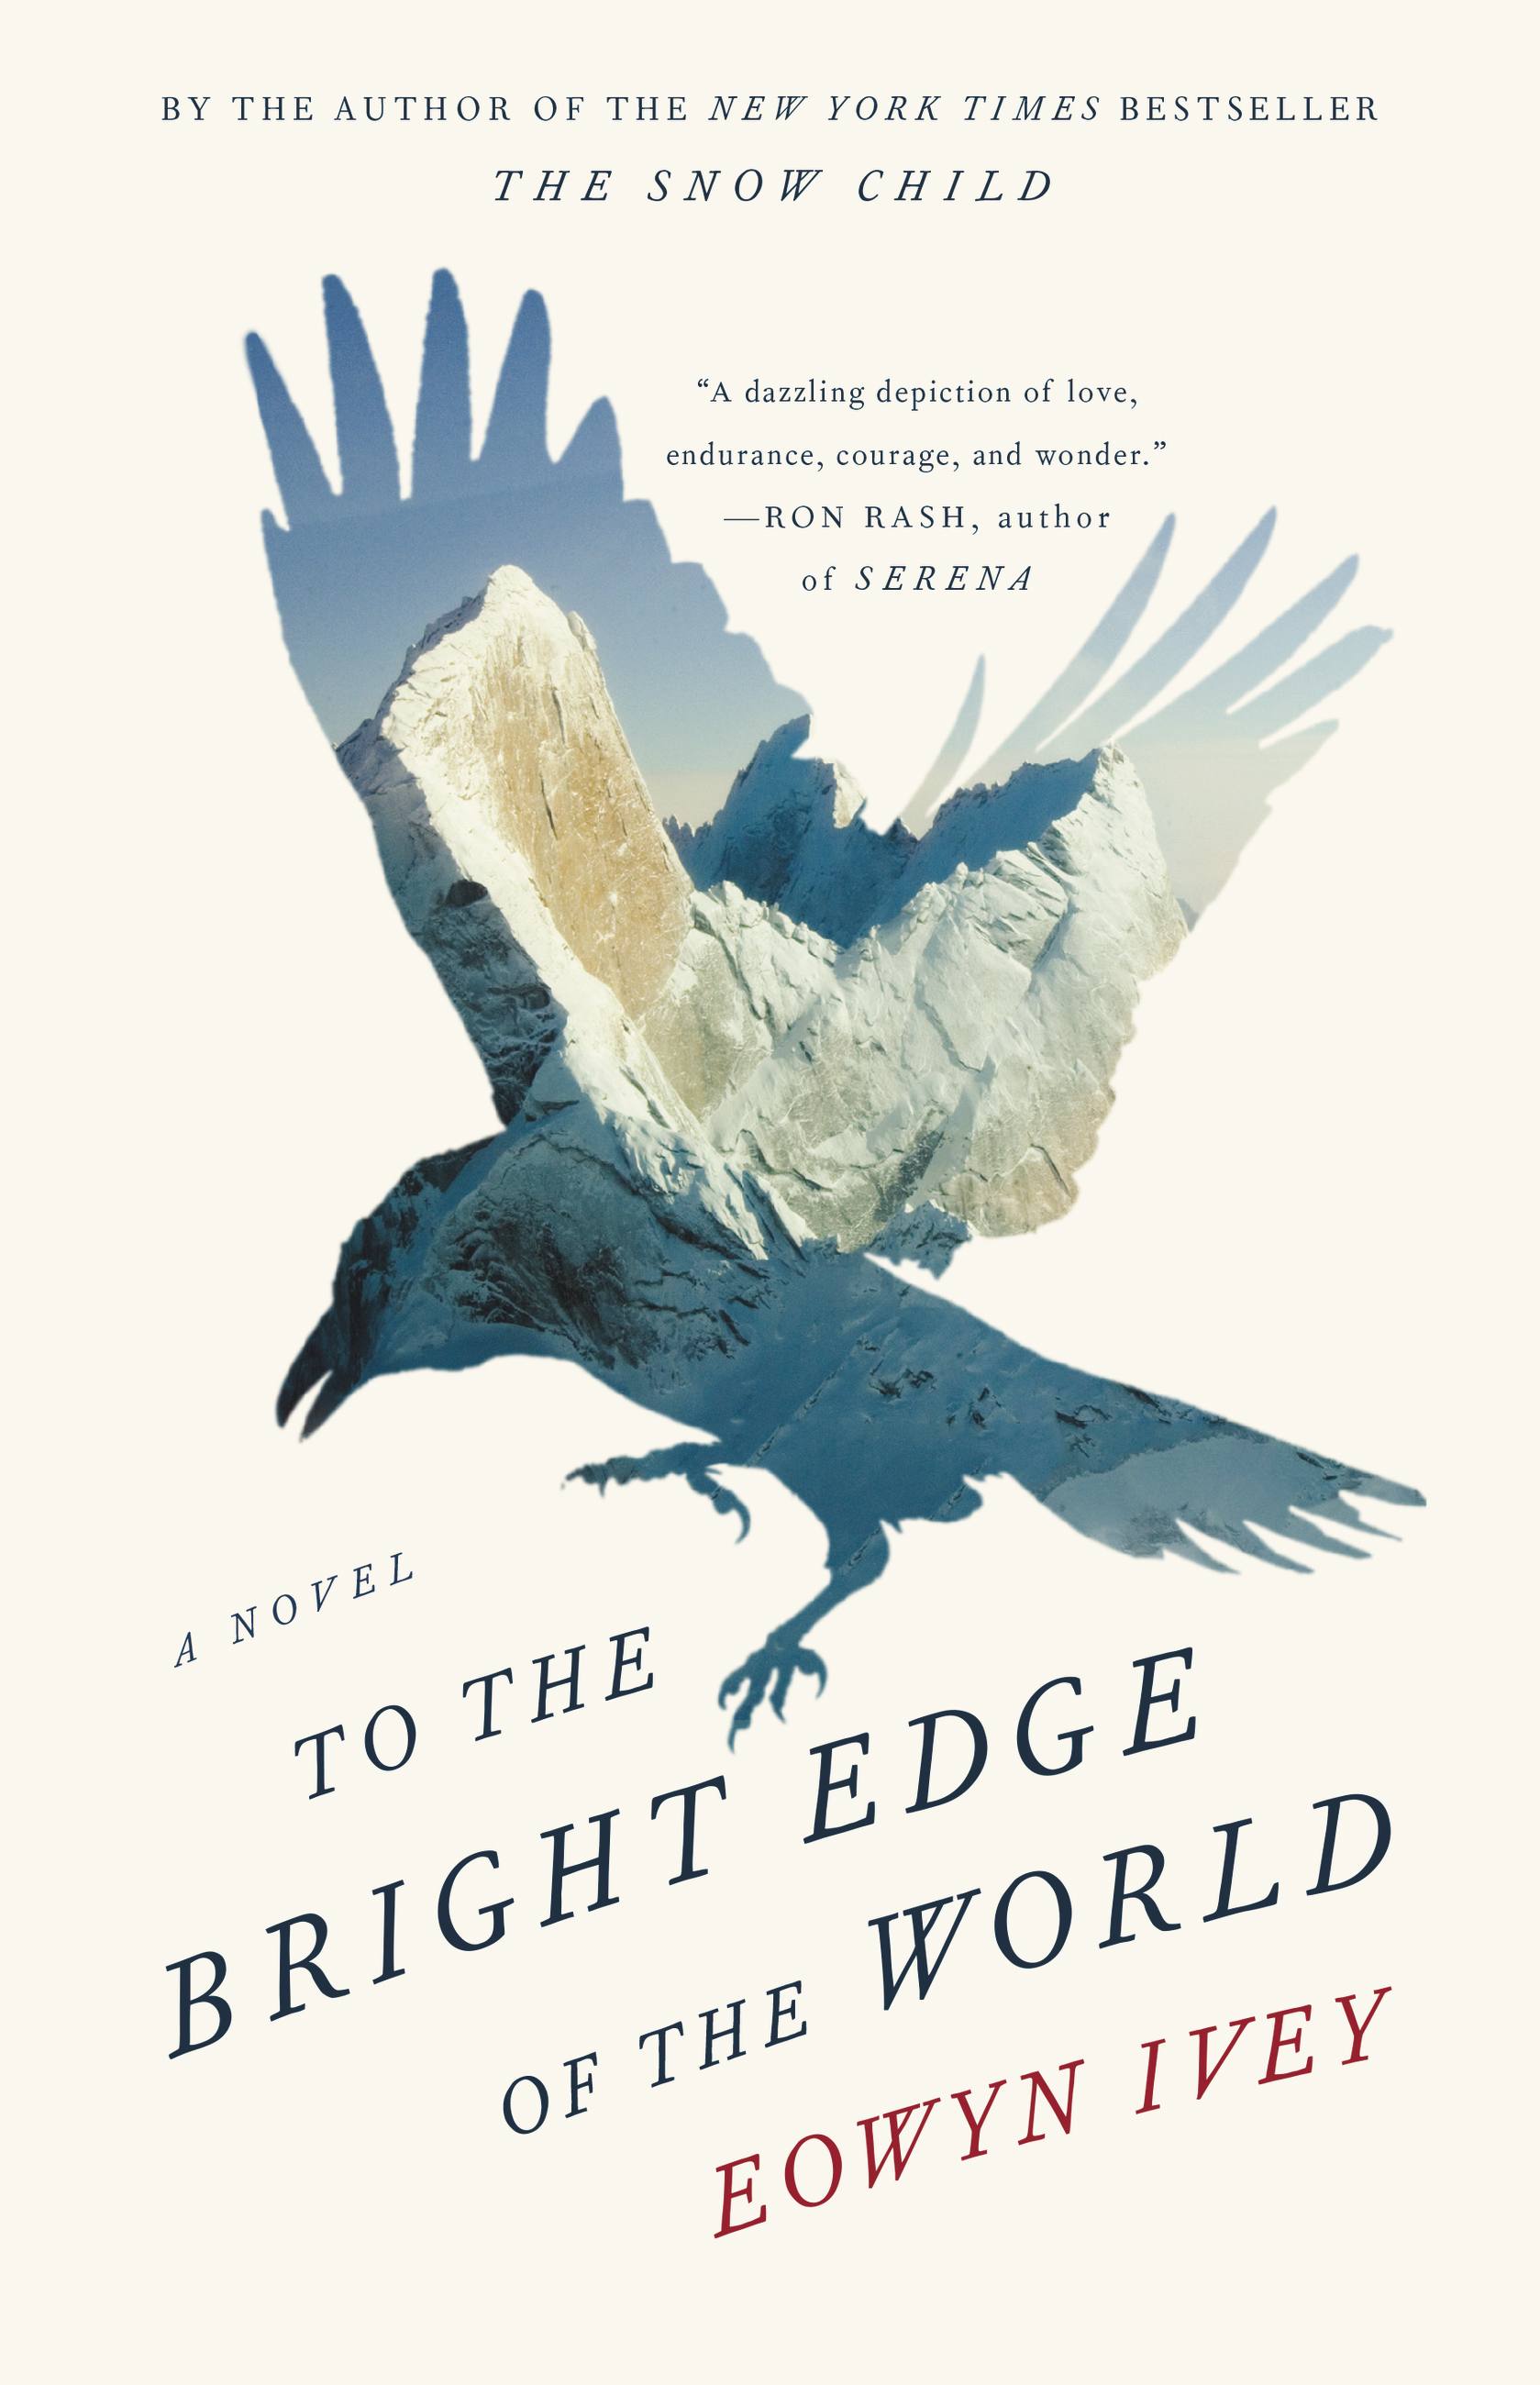 Image de couverture de To the Bright Edge of the World [electronic resource] : A Novel